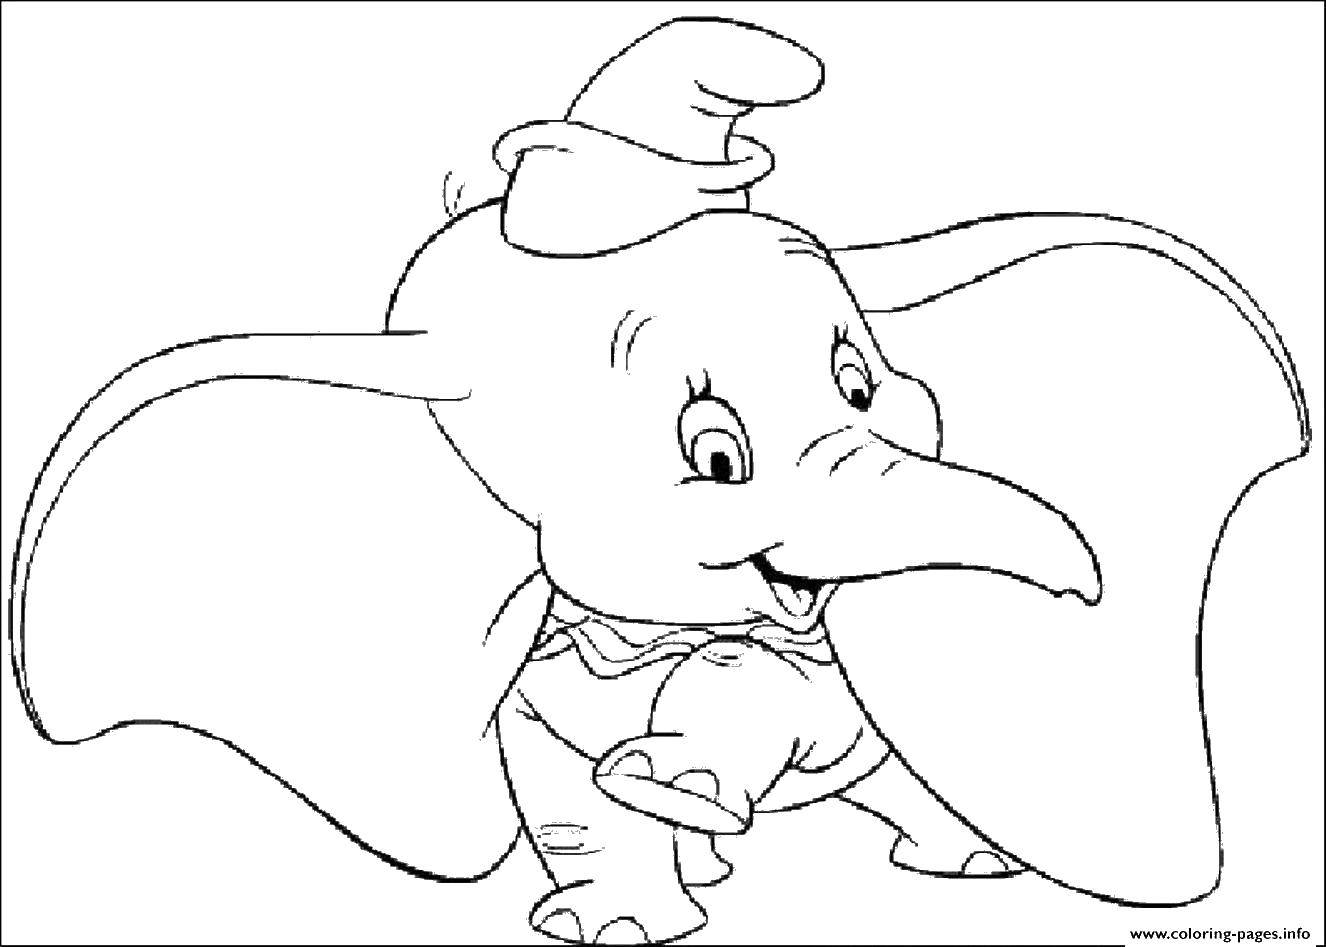 Coloring Circus elephant. Category circus. Tags:  elephant, elephant, circus.